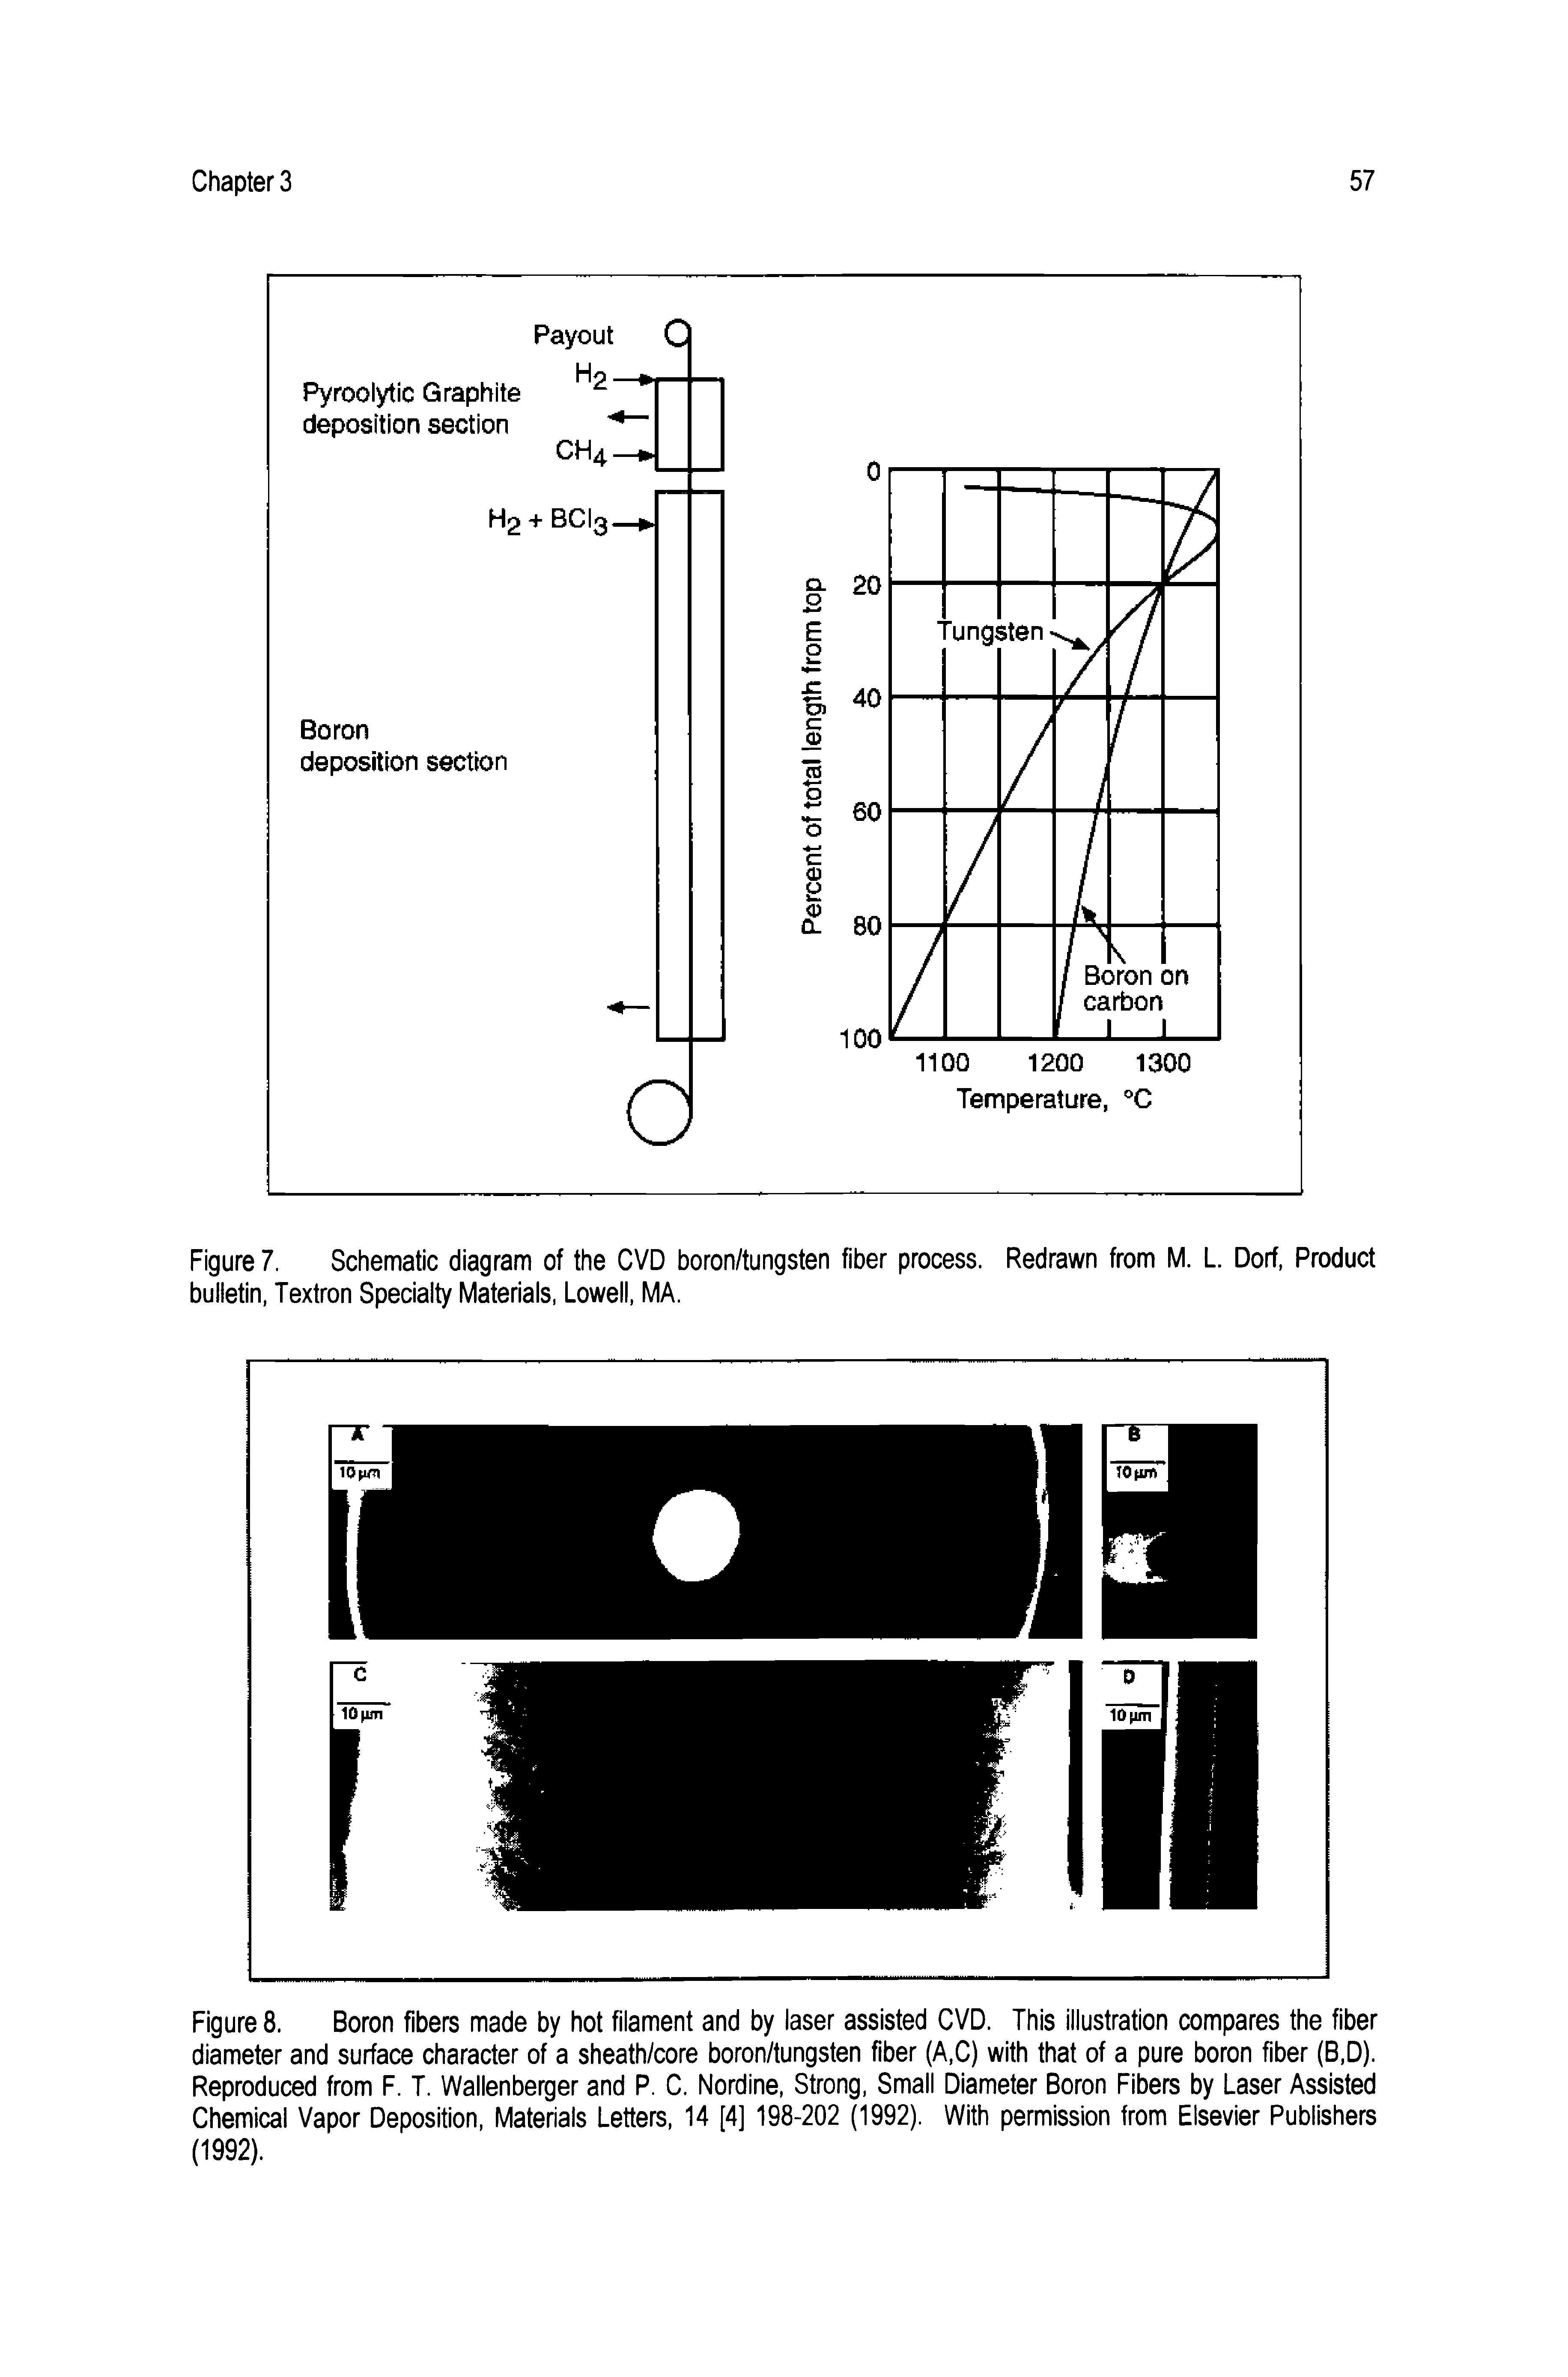 Figure 7. Schematic diagram of the CVD boron/tungsten fiber process. Redrawn from M. L. Dorf, Product bulletin, Textron Specialty Materials. Lowell, MA.